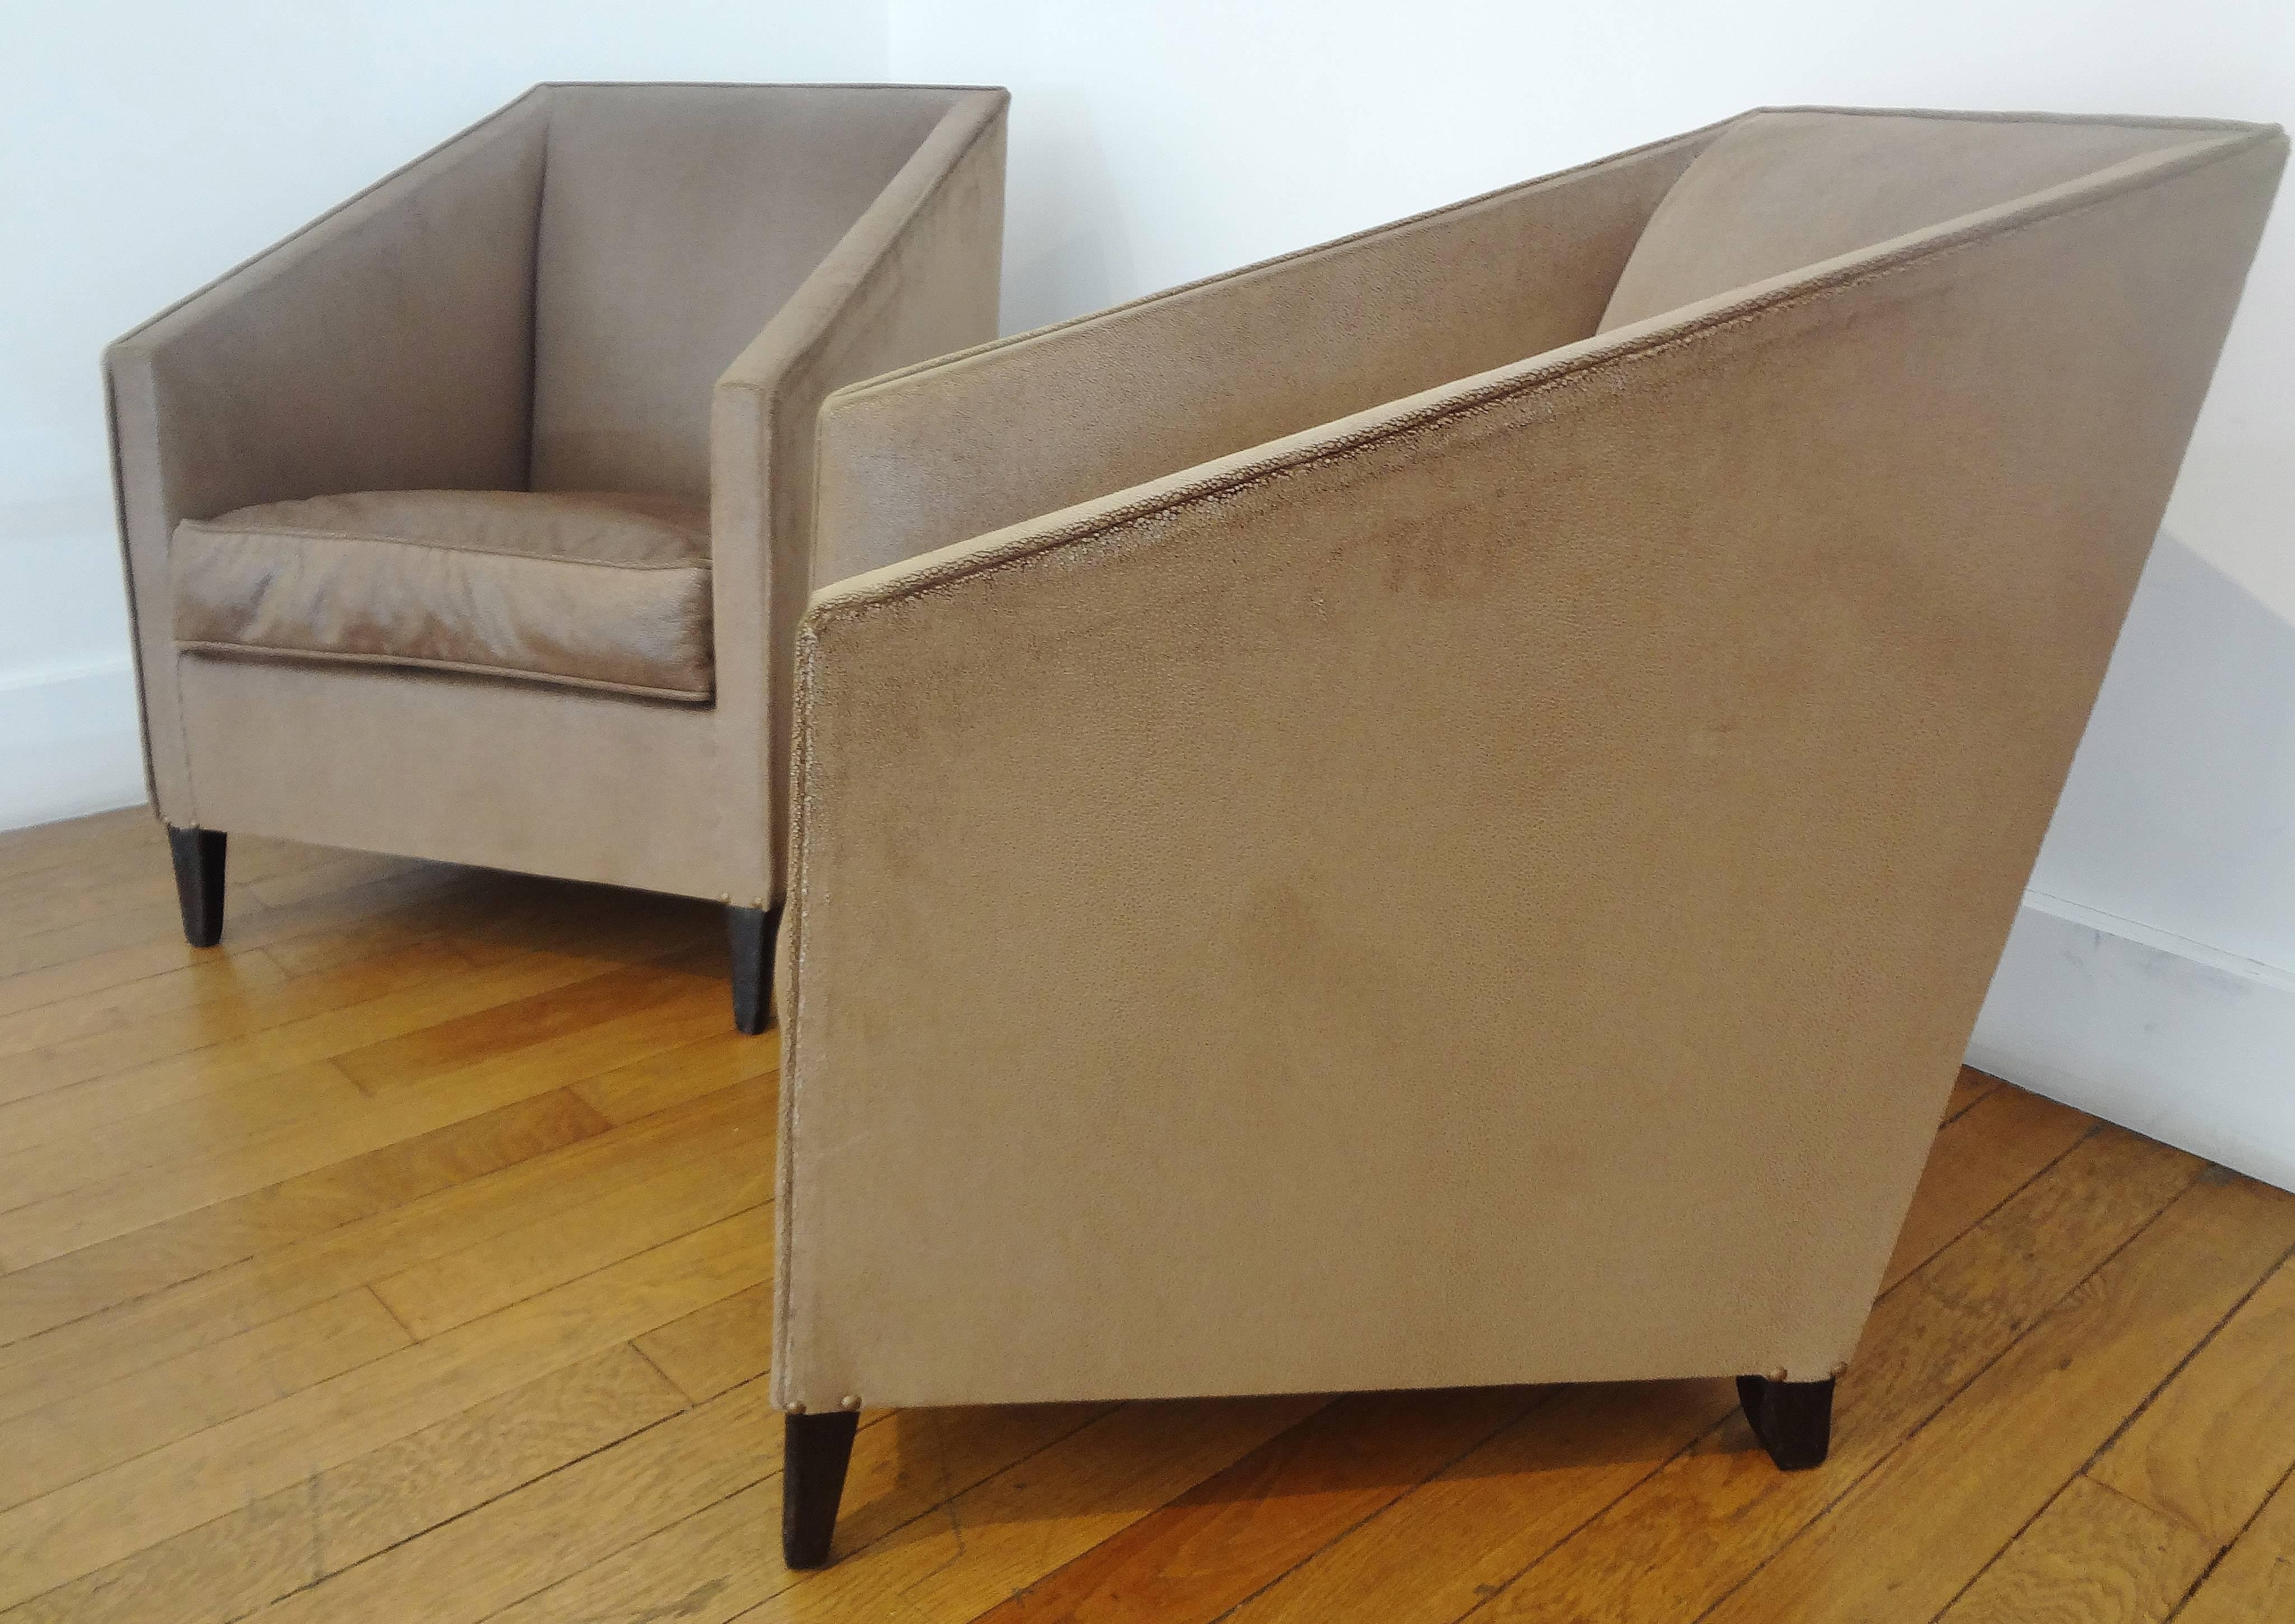 Pair of Modernist Armchairs, 1920s, by Francis Jourdain In Good Condition For Sale In Paris, FR